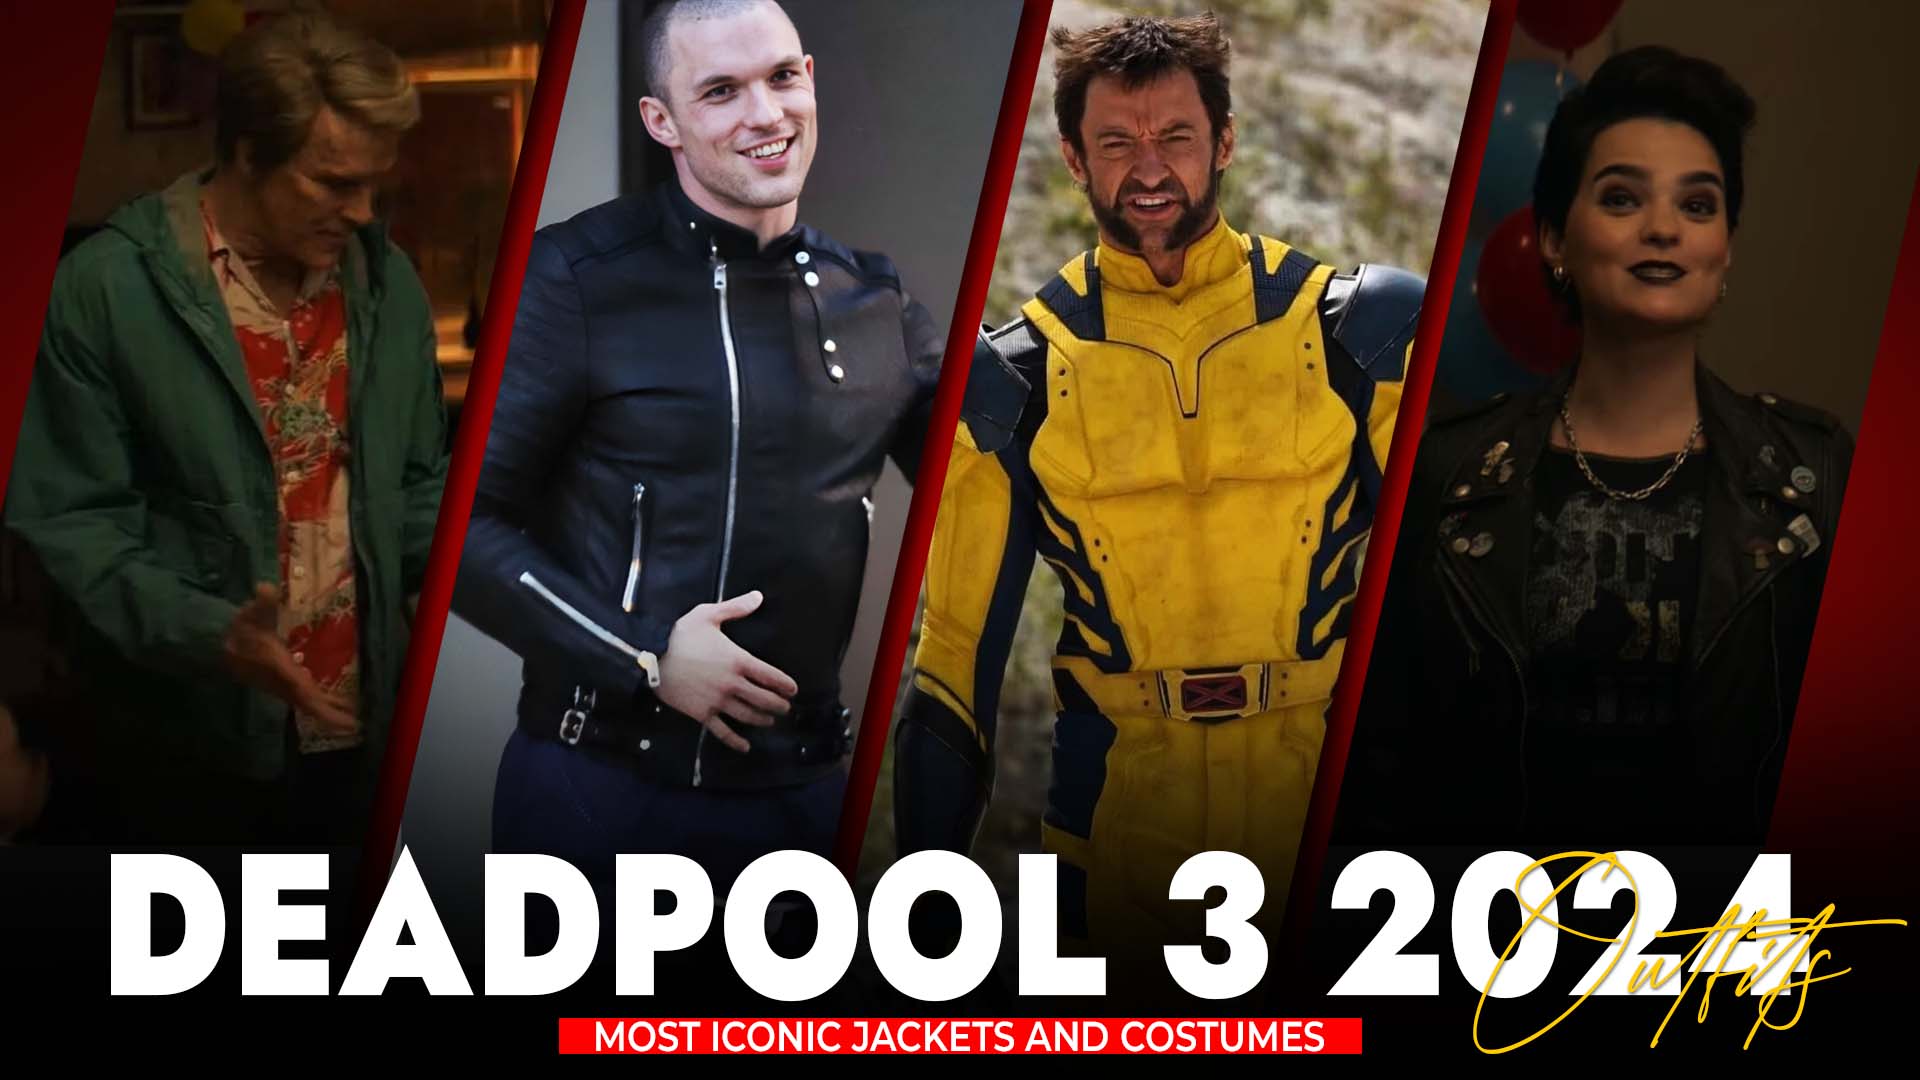 You are currently viewing Deadpool 3 2024 Outfits : Most Iconic Jackets and Costumes